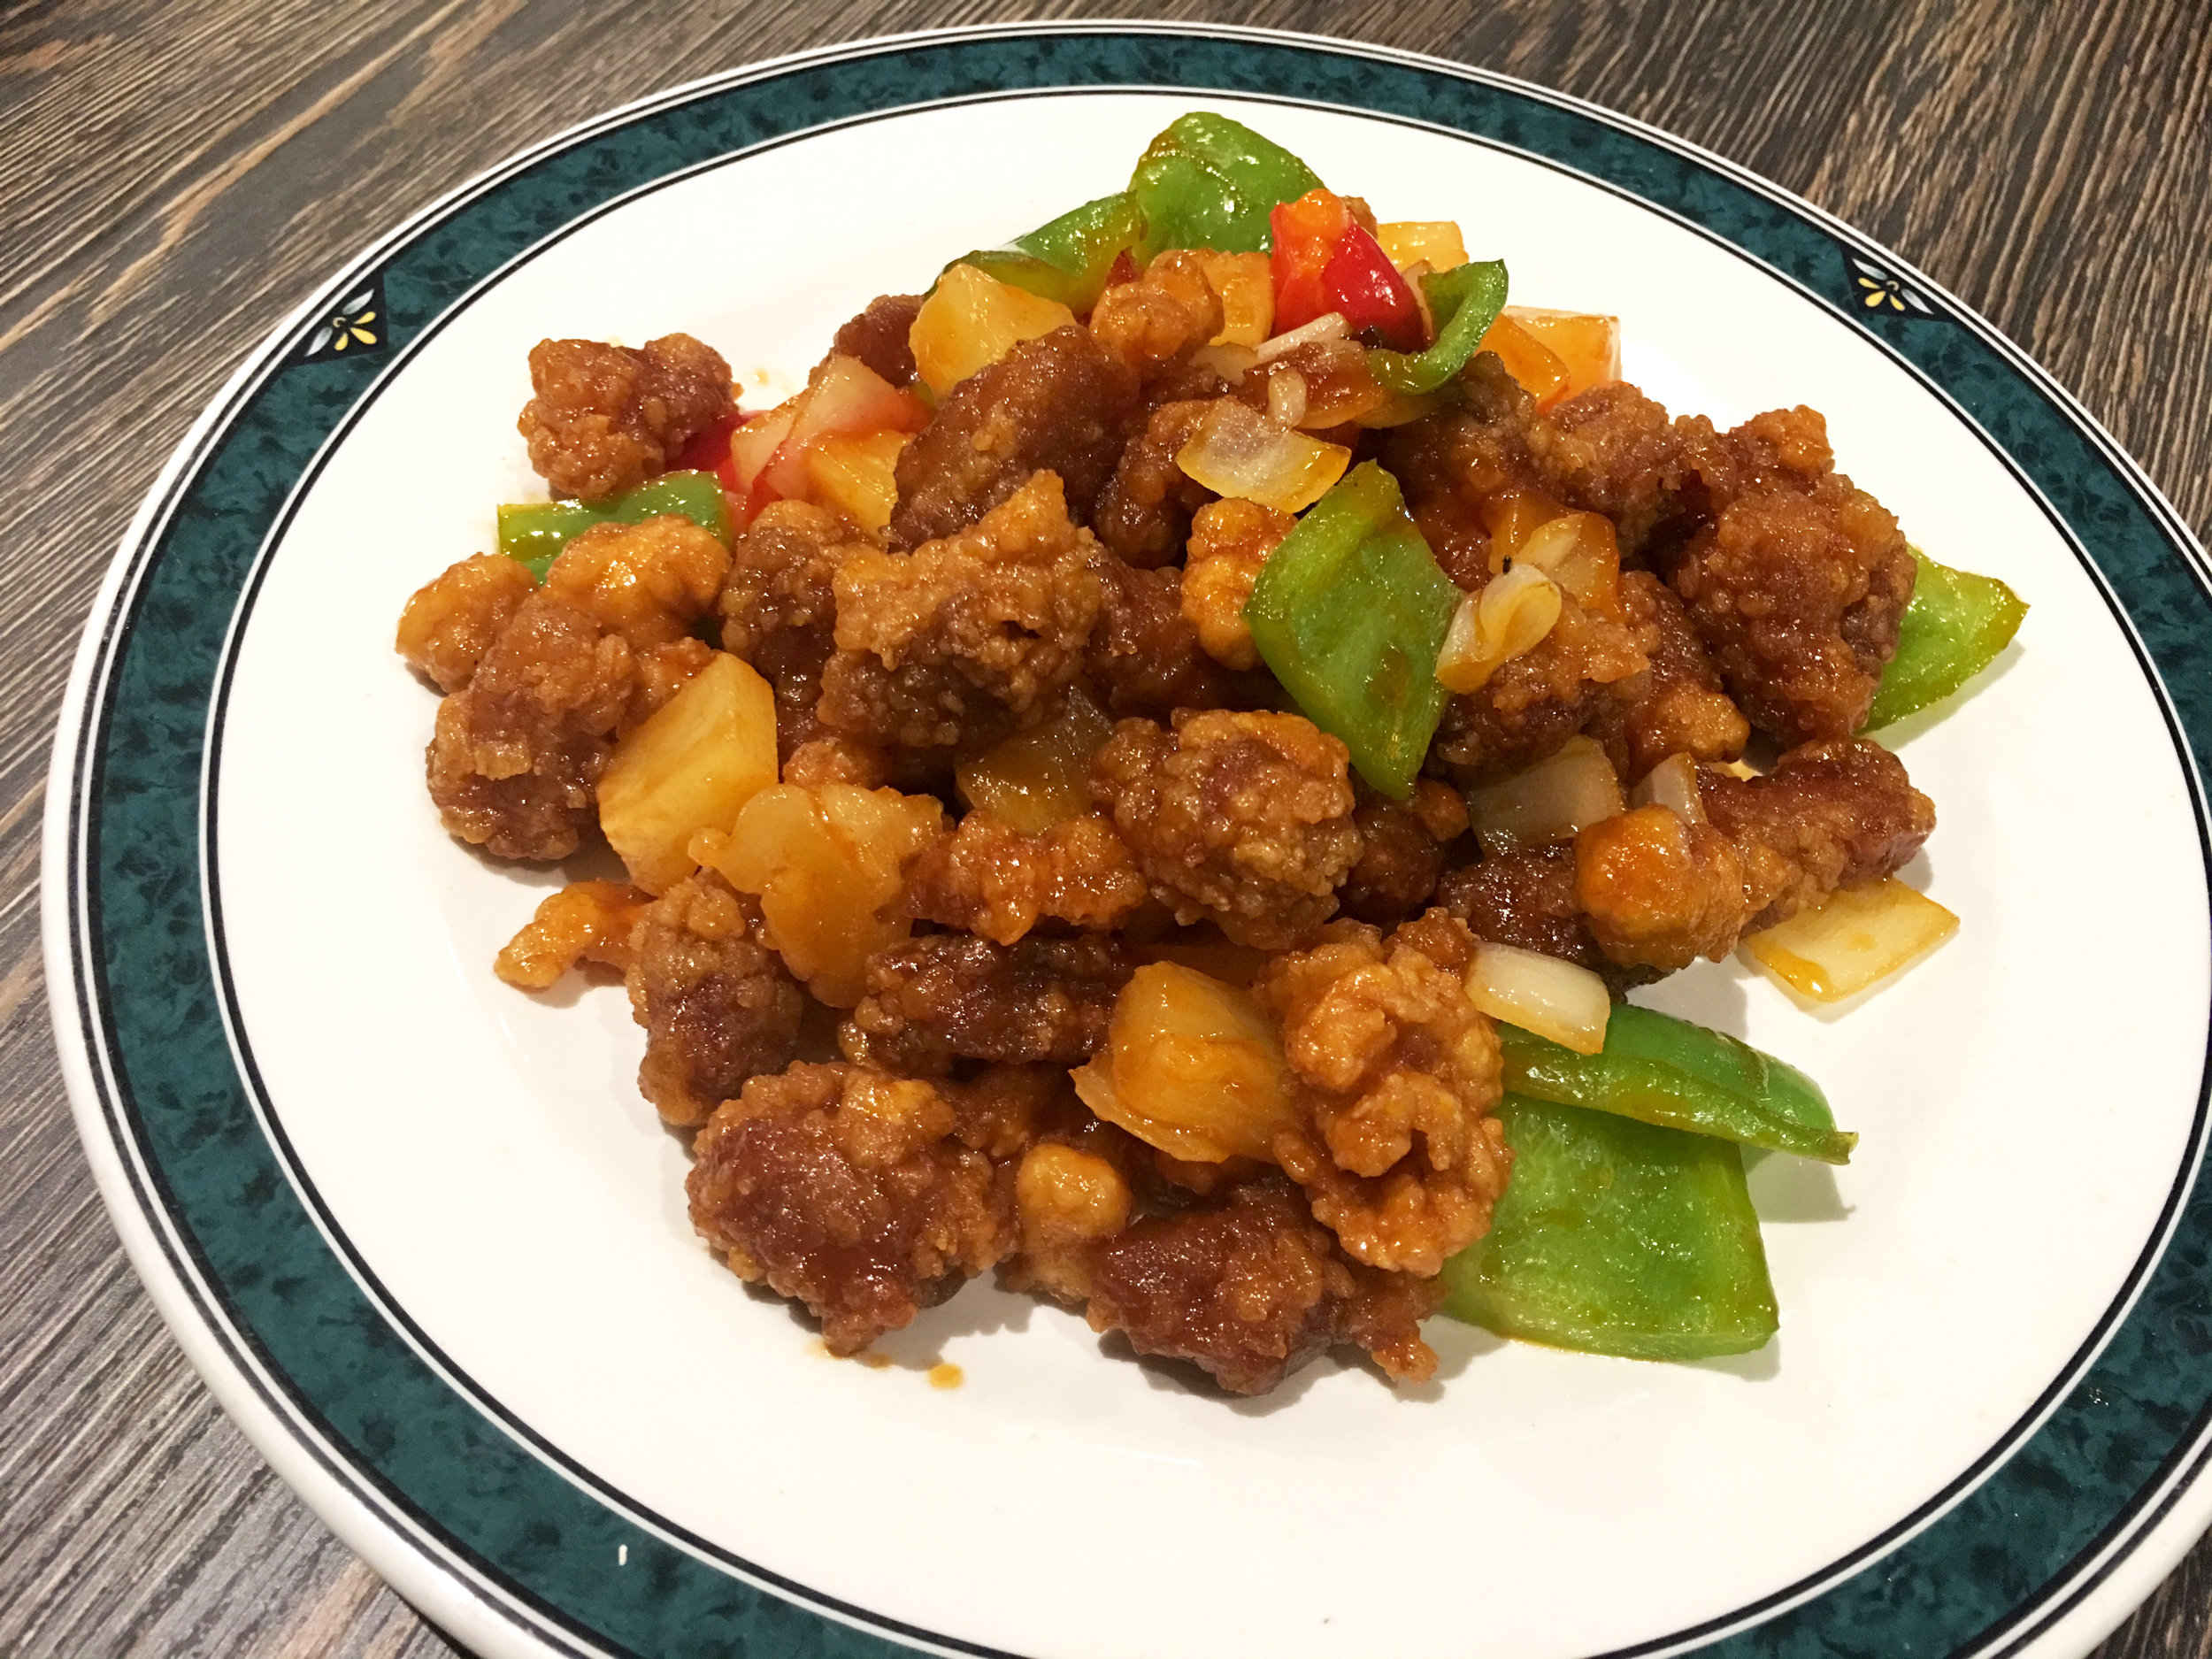  SWEET &amp; SOUR FRIED PORK WITH PINEAPPLE | 菠蘿咕嚕肉 